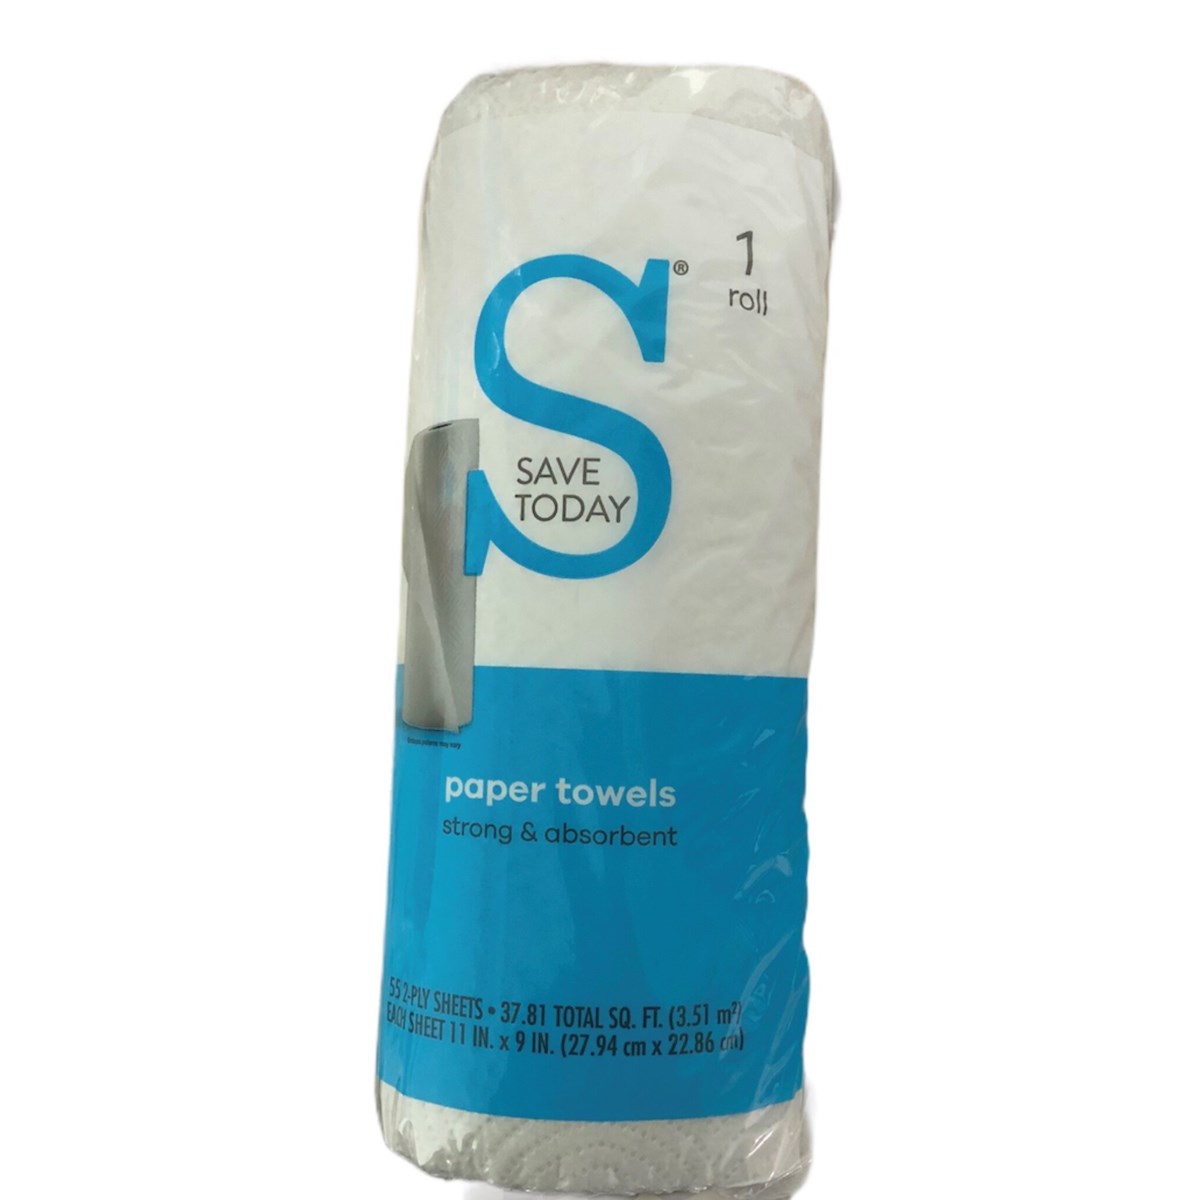 SAVE TODAY PAPER TOWELS 55 SHEETS 